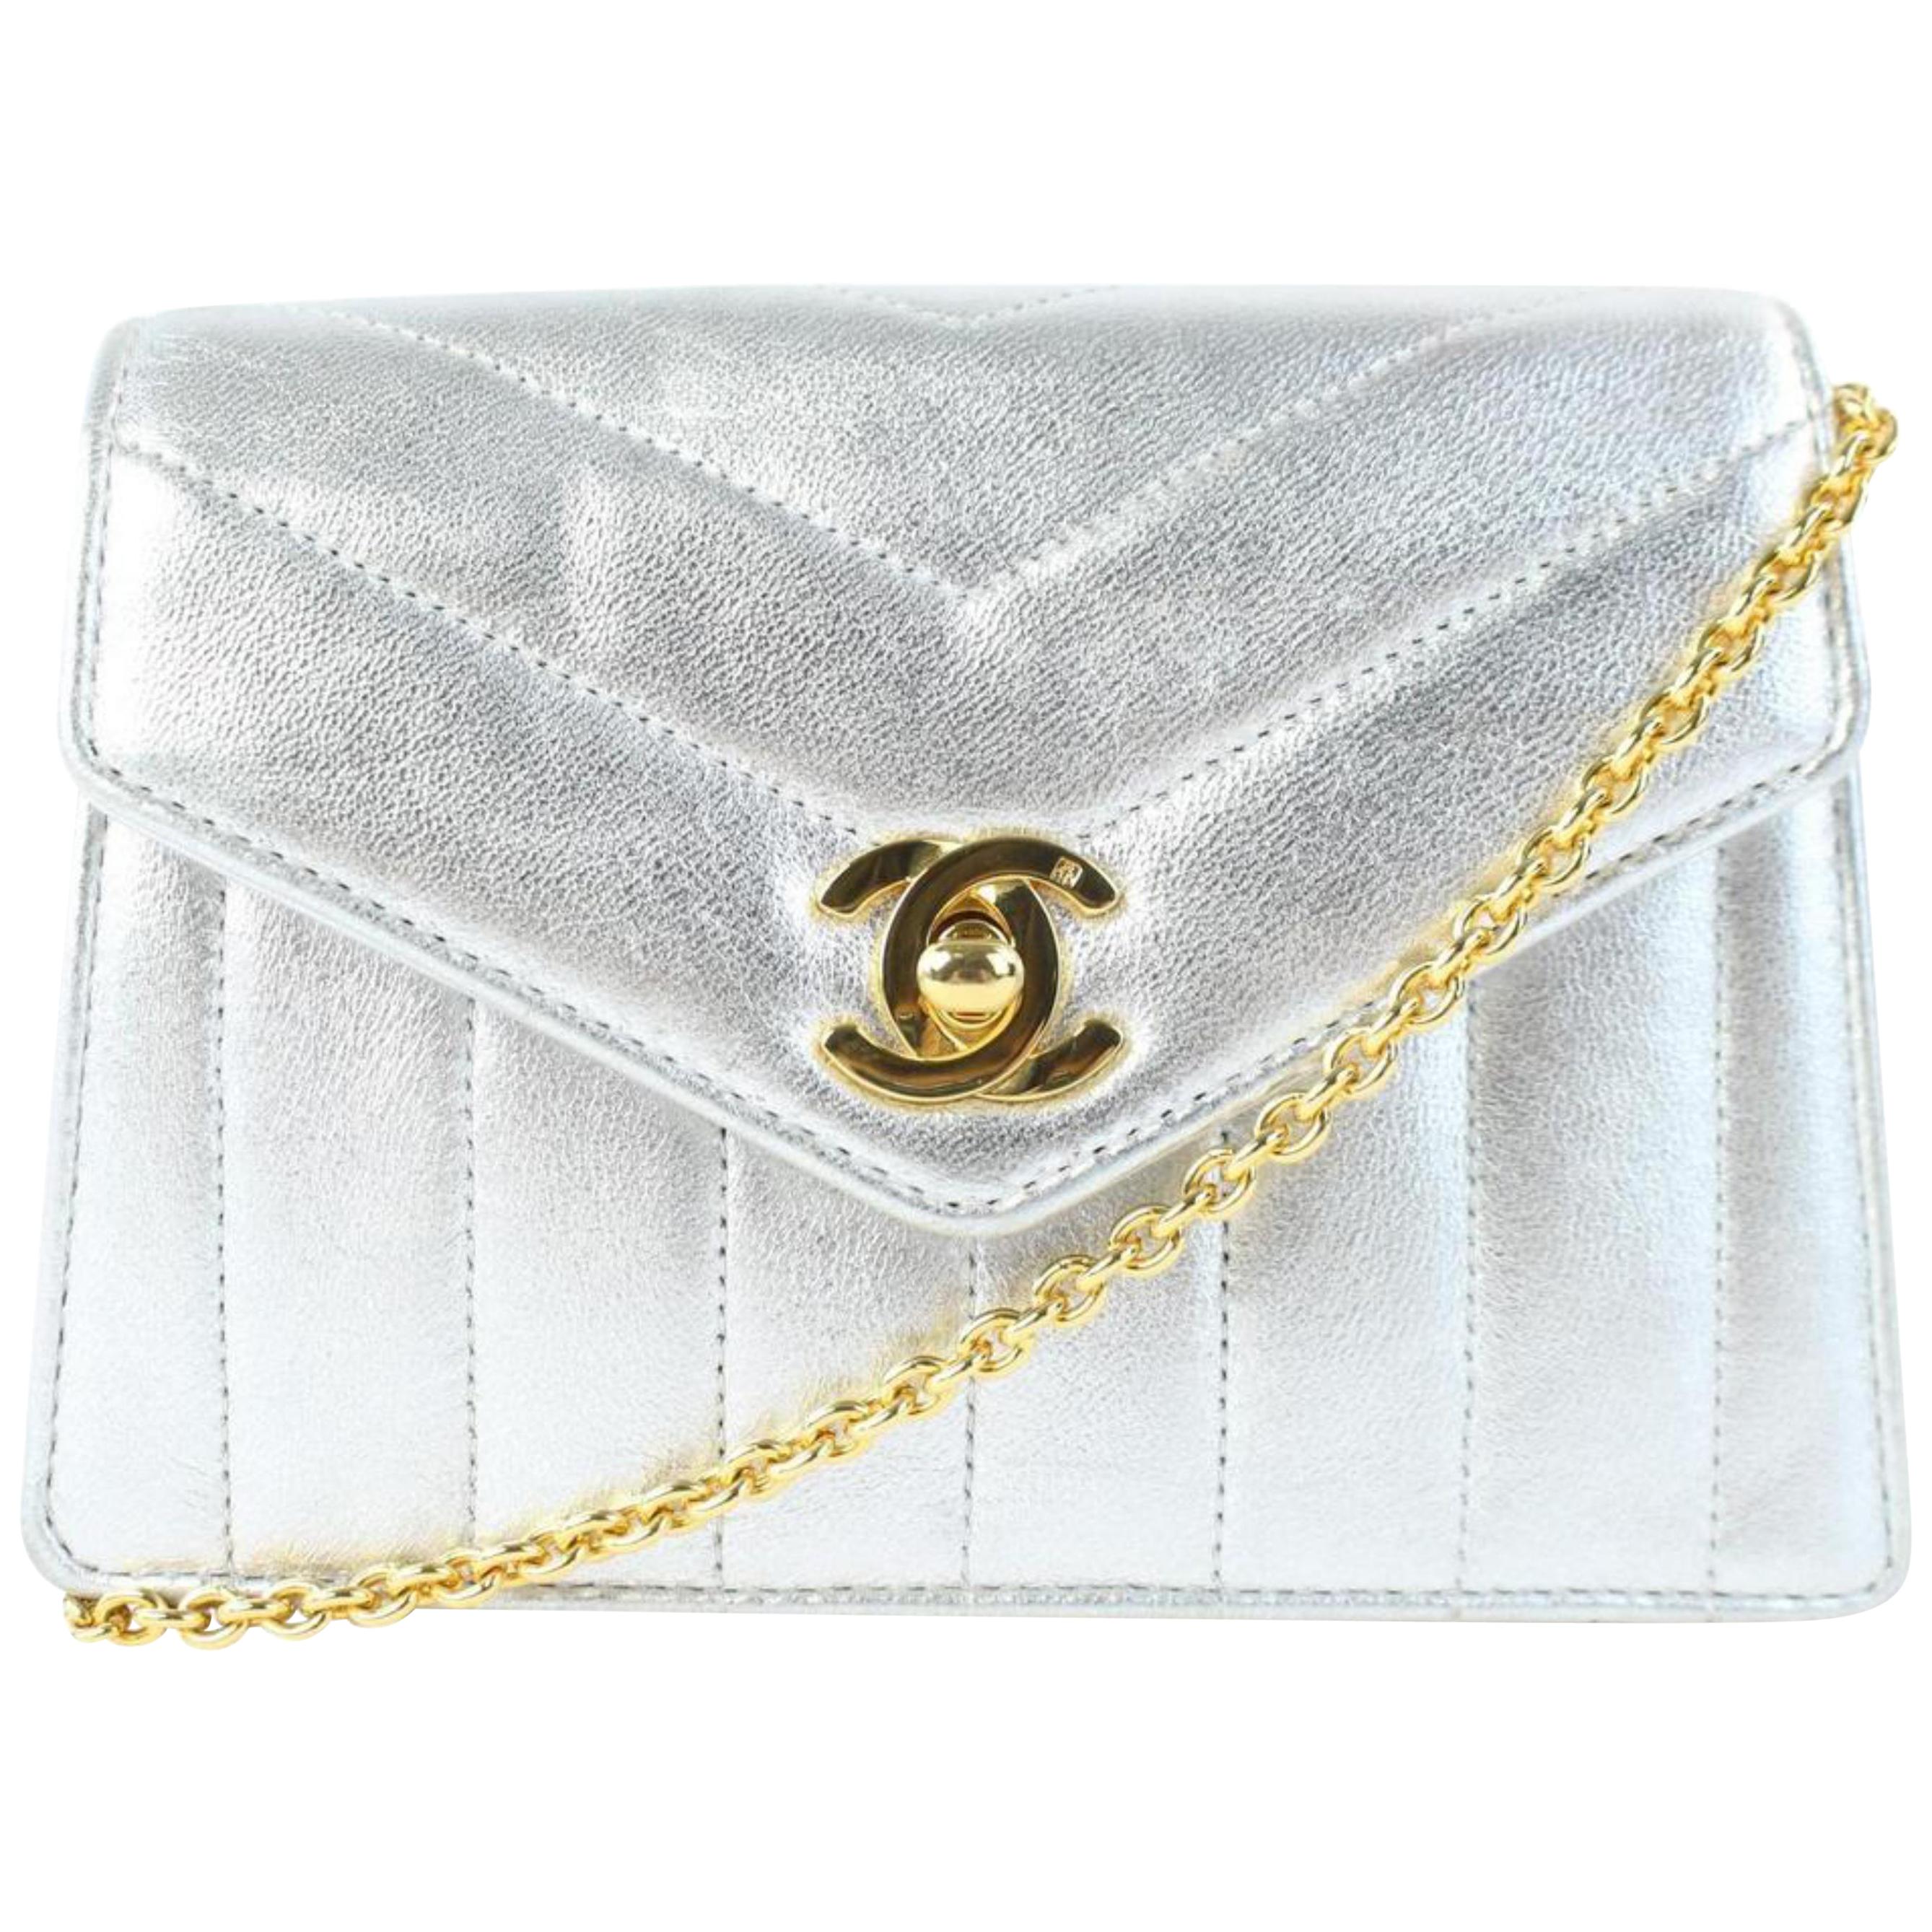 Chanel Quilted Chevron Mini Flap 03cz0717 Silver Metallic Leather Cross Body Bag For Sale